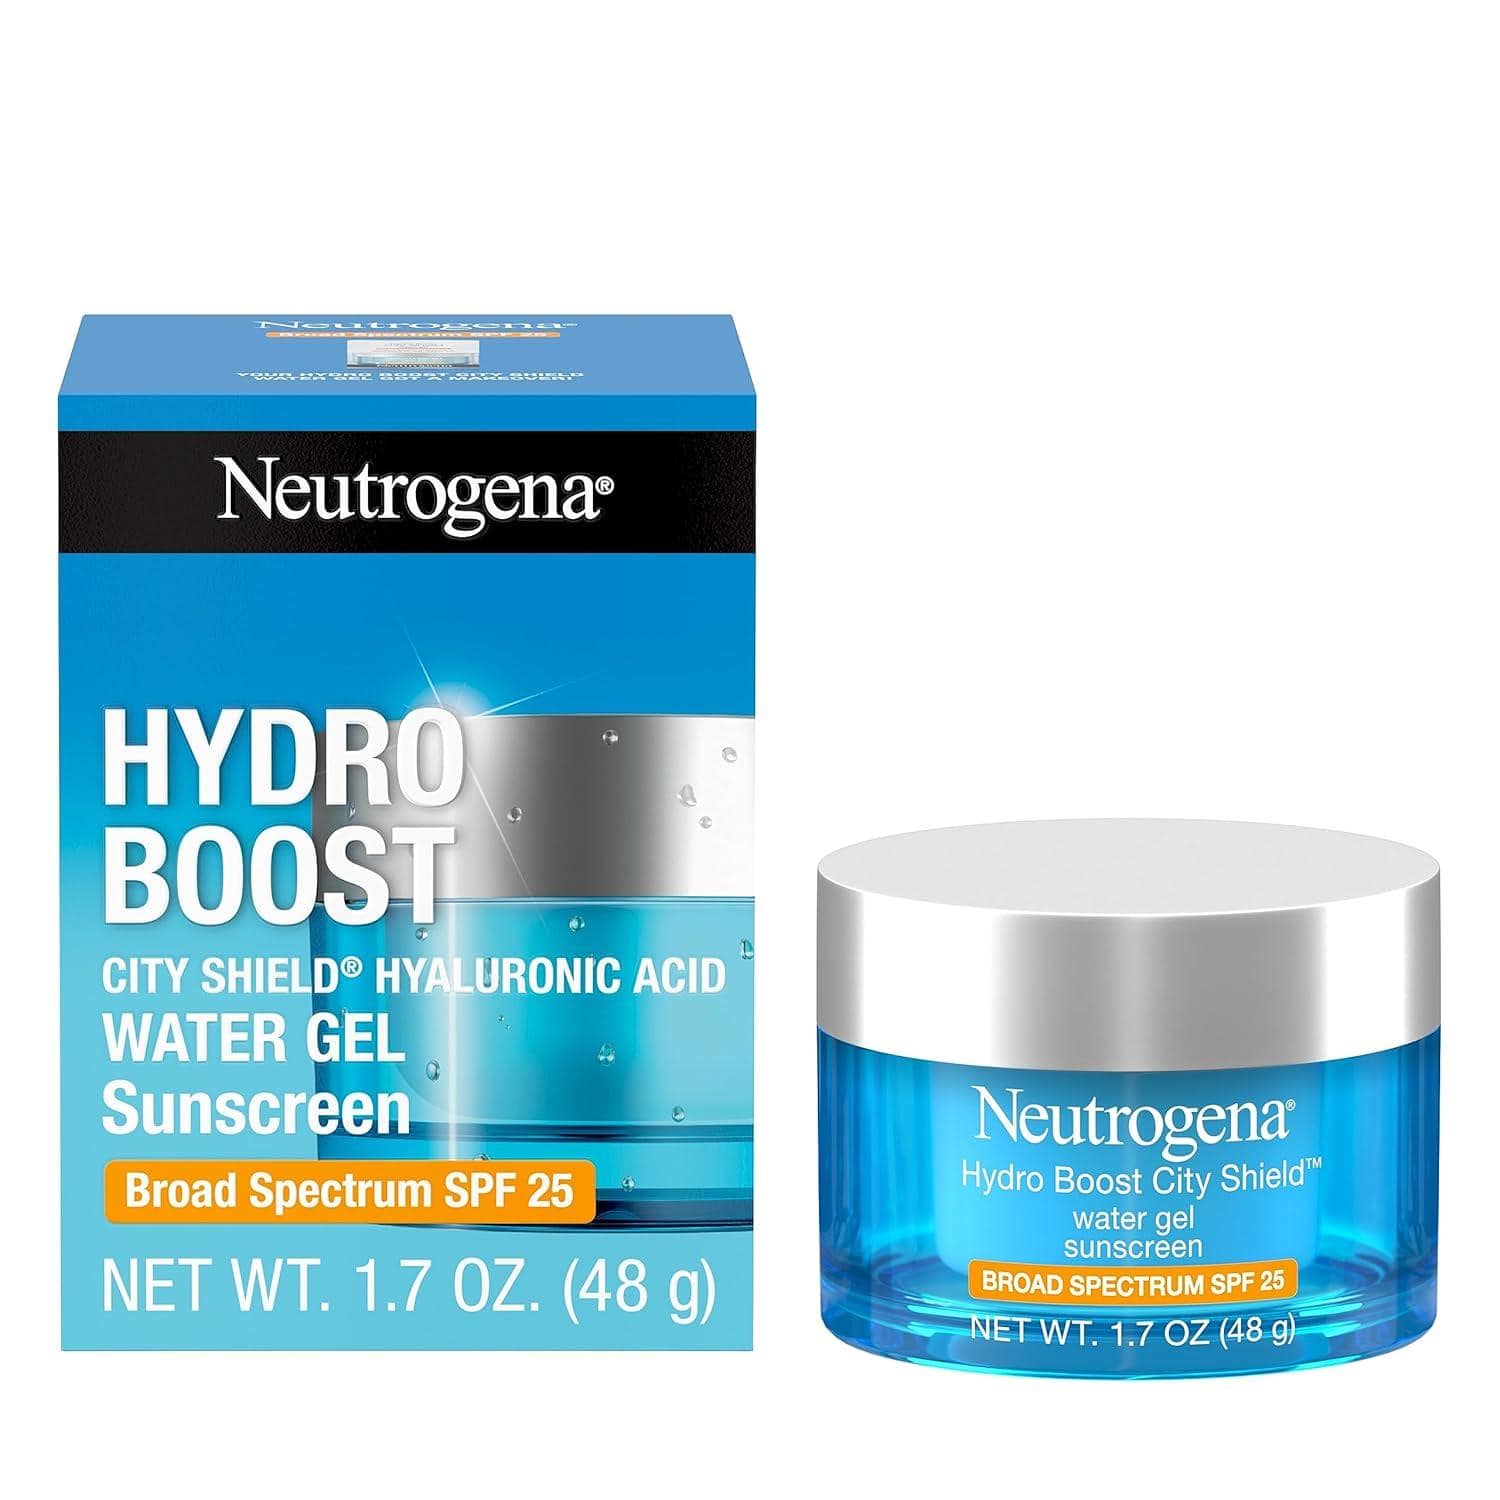 Neutrogena's Hydro Boost Water Gel-  Dermatologist-Recommended Moisturizing Cream for Ultimate Hydration in Dry Winter Conditions.